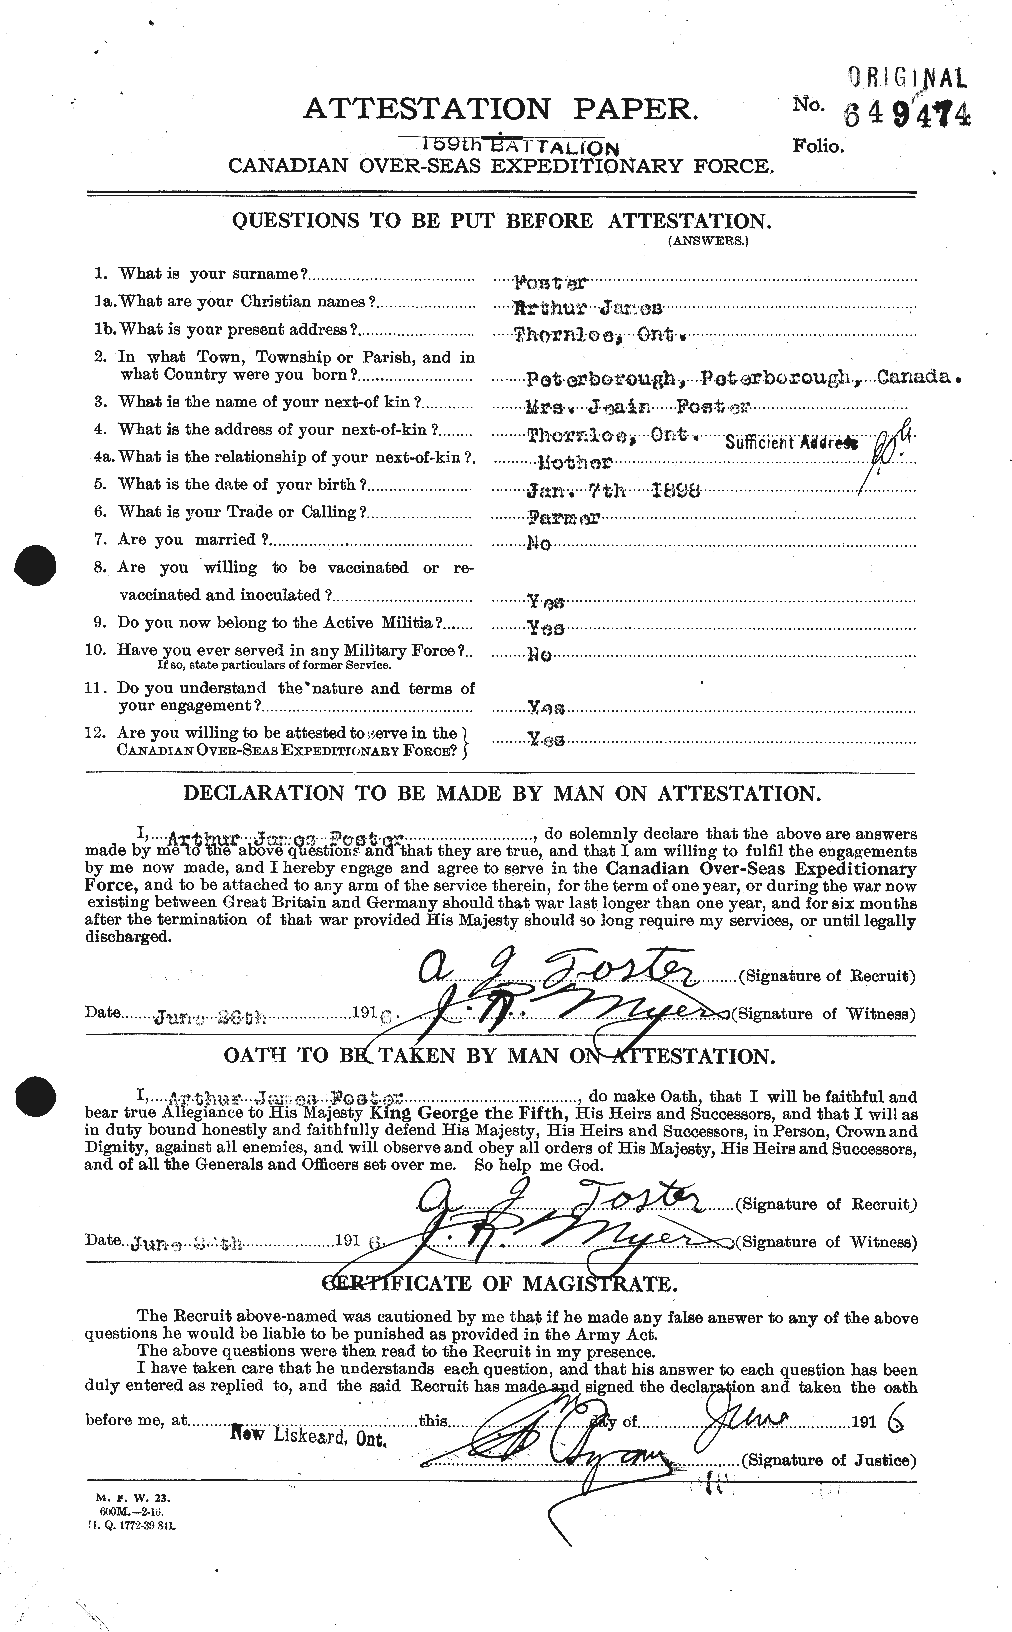 Personnel Records of the First World War - CEF 330475a